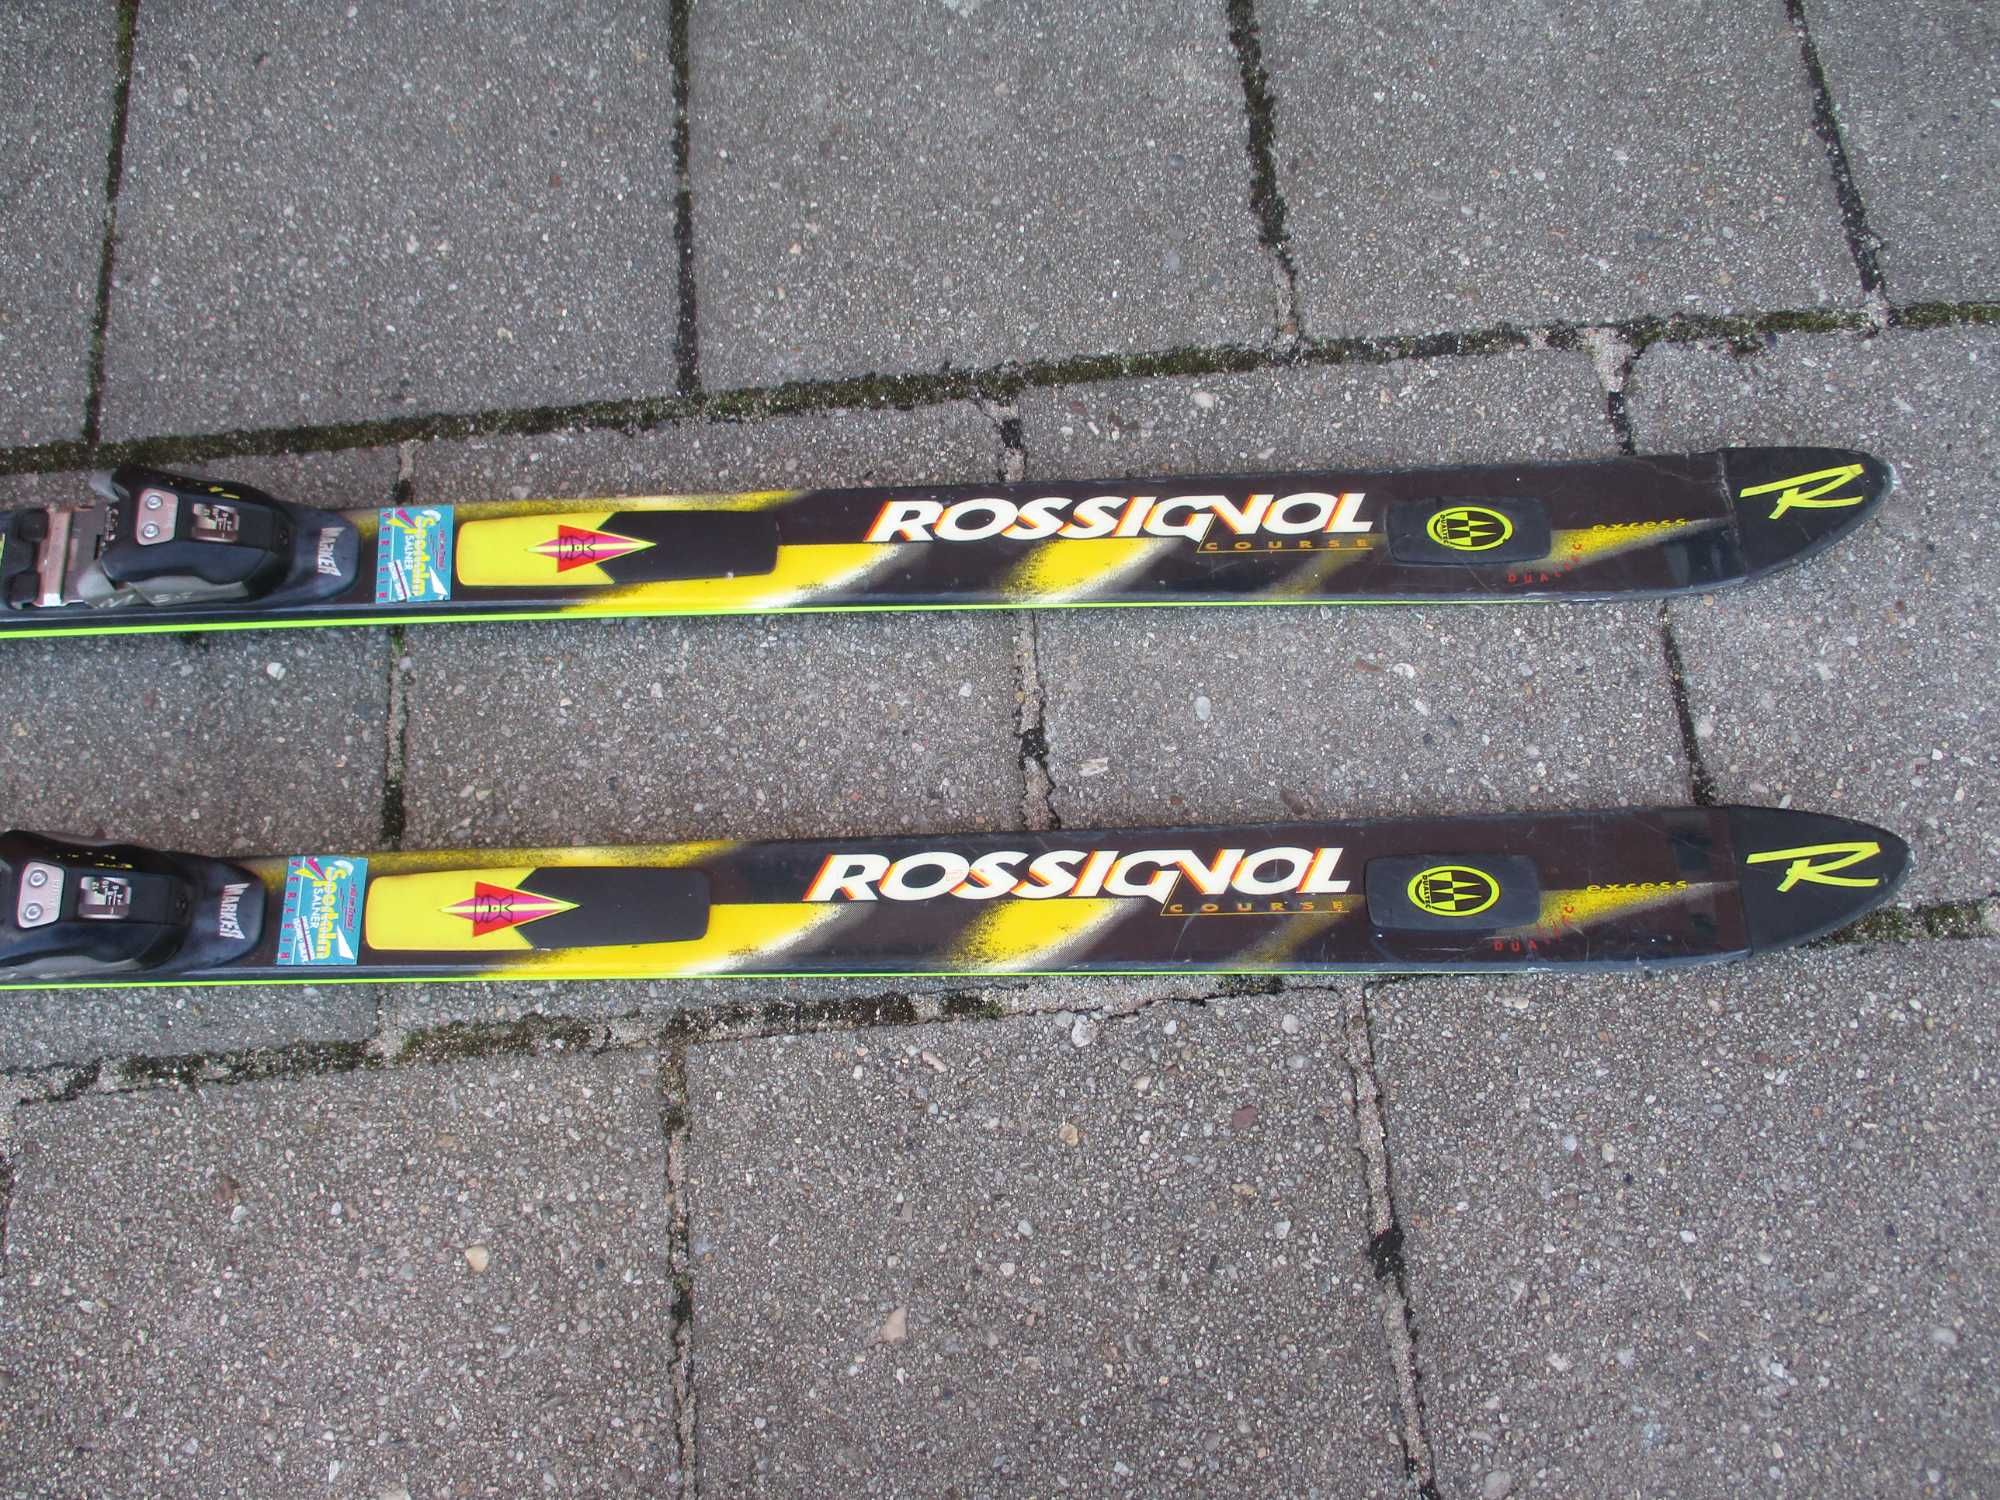 Narty Rossignol Cx s